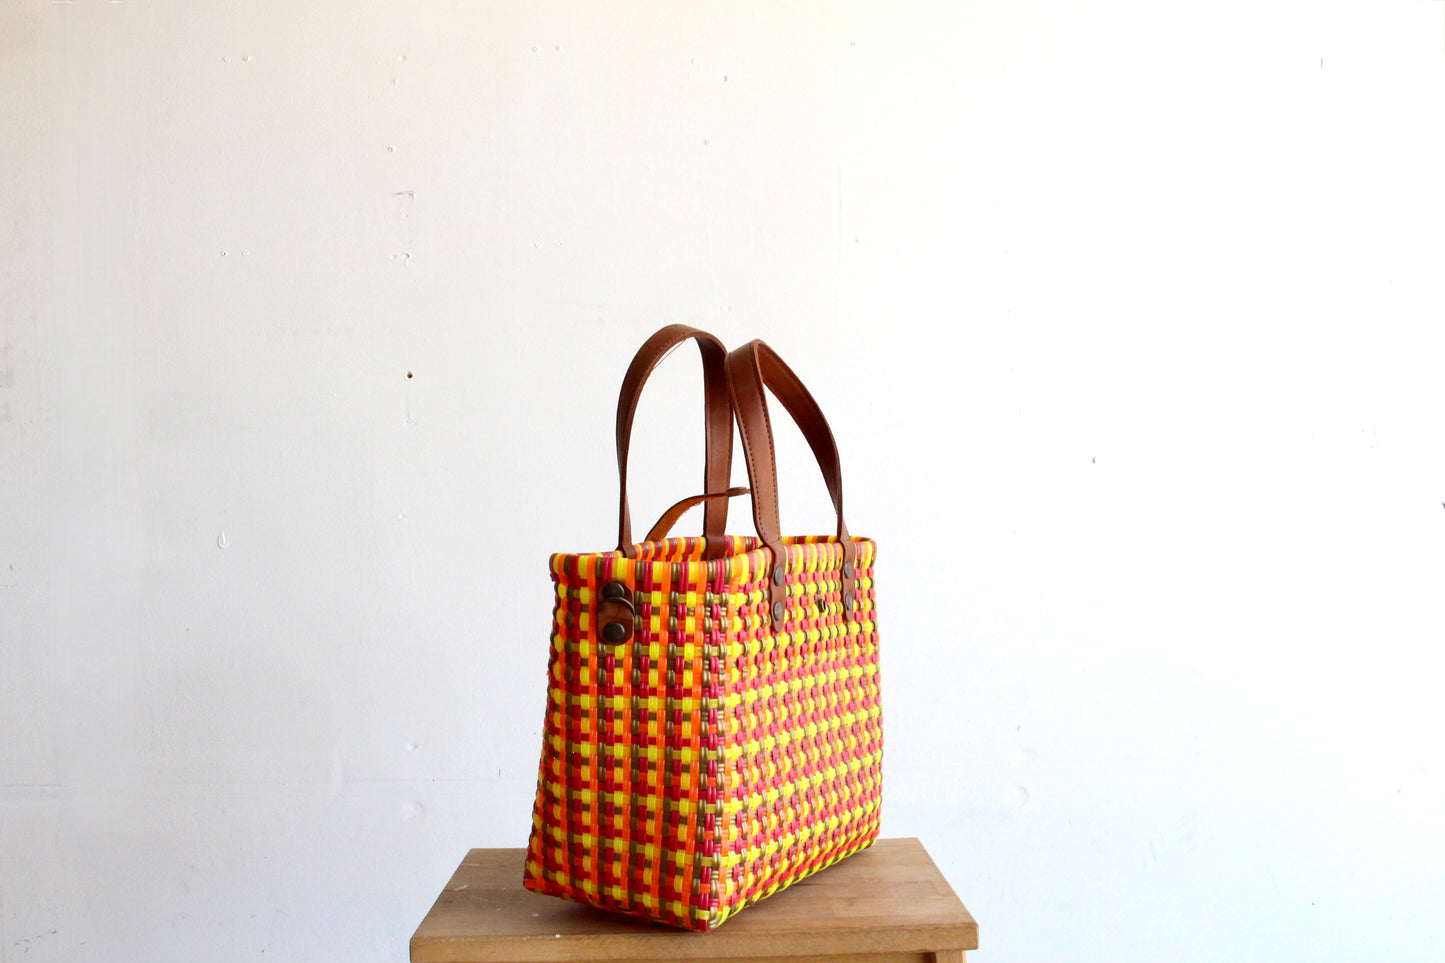 Red, Orange, Yellow & Gold Purse bag by MexiMexi